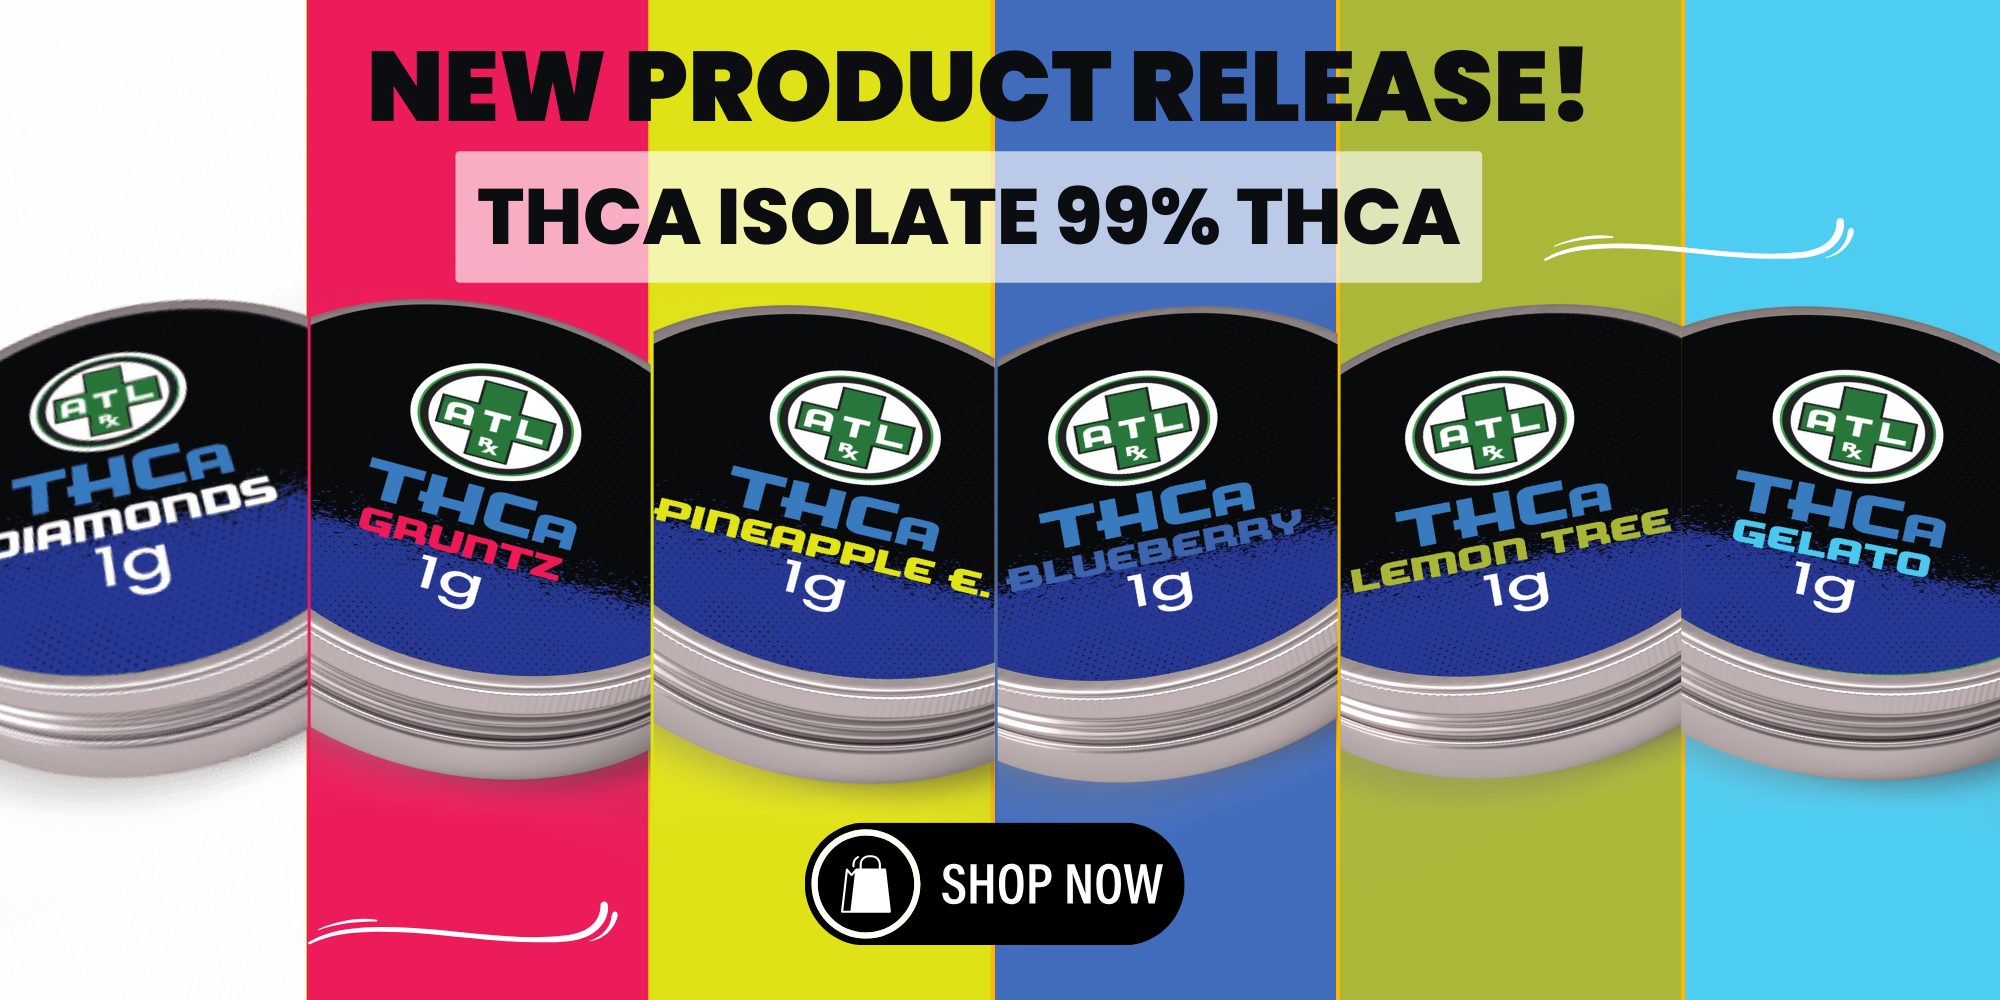 ATLRx New Product Release THCA Isolate View 1